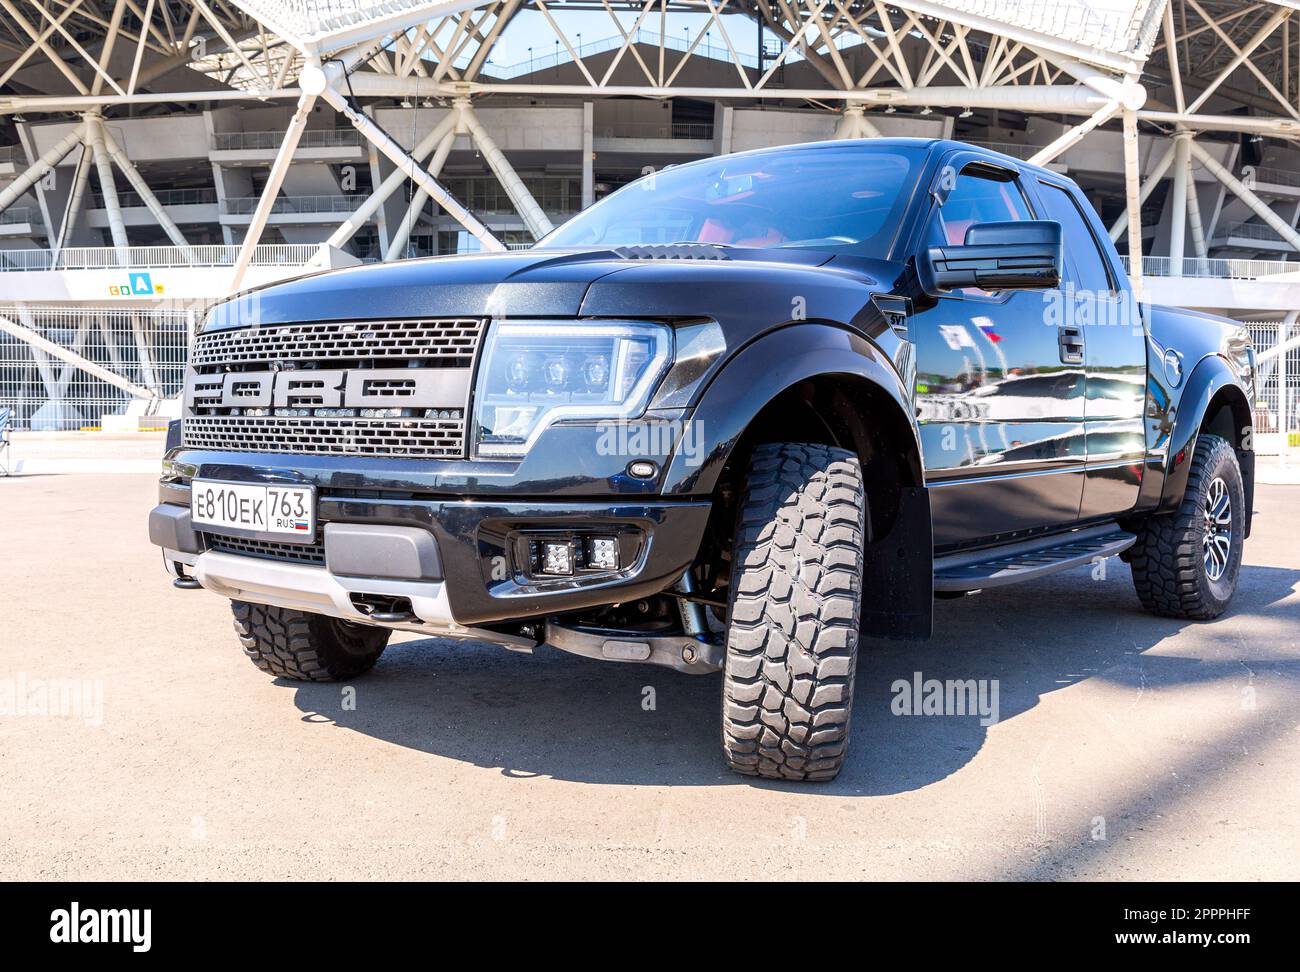 Samara, Russia - June 26, 2022: Off-road 4x4 Ford F-150 Raptor vehicle with all terrain tires Nokian Tyres. Black all terrain vehicle Ford 4x4 Stock Photo